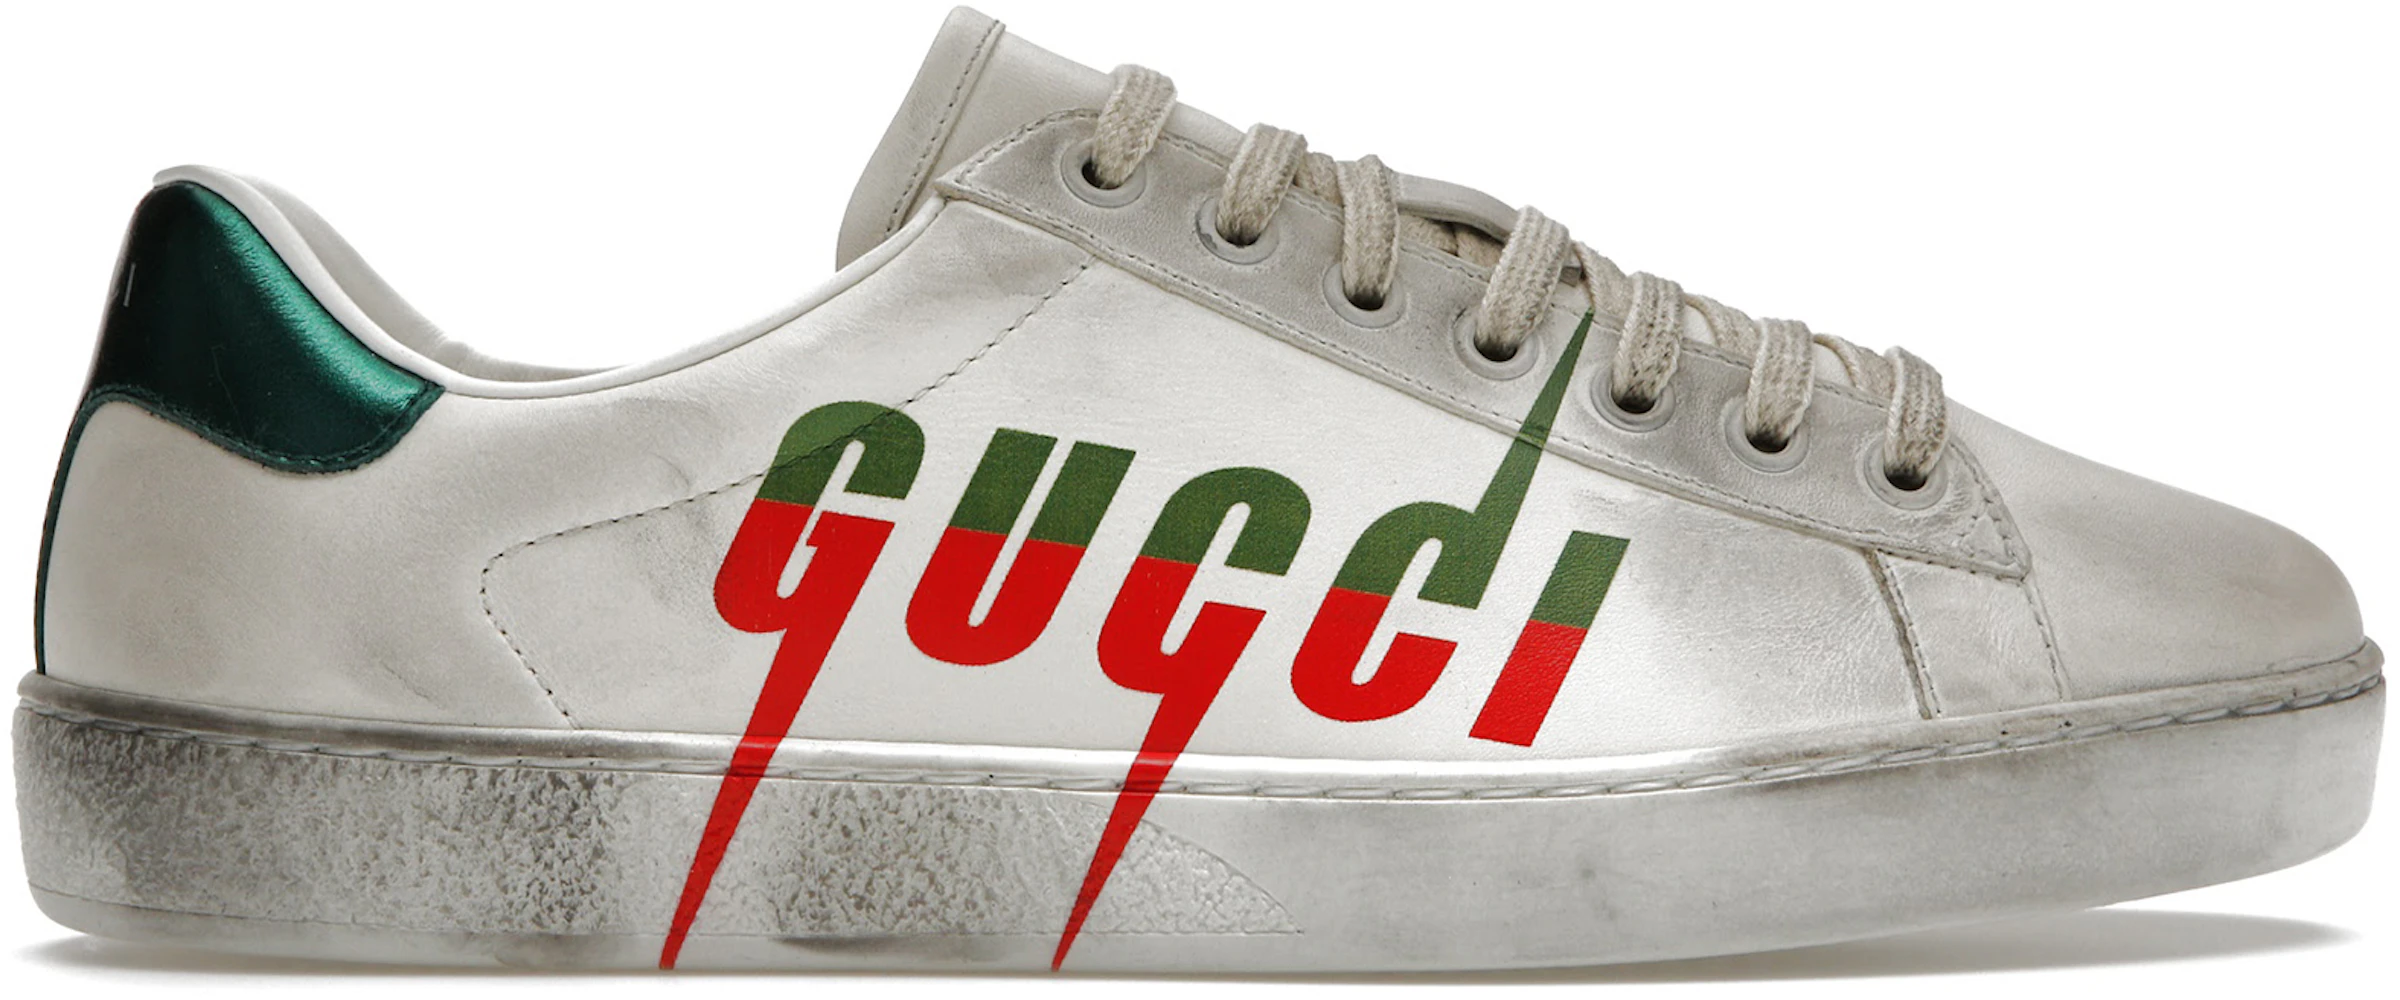 Gucci Shoes, Sneakers and Sandals